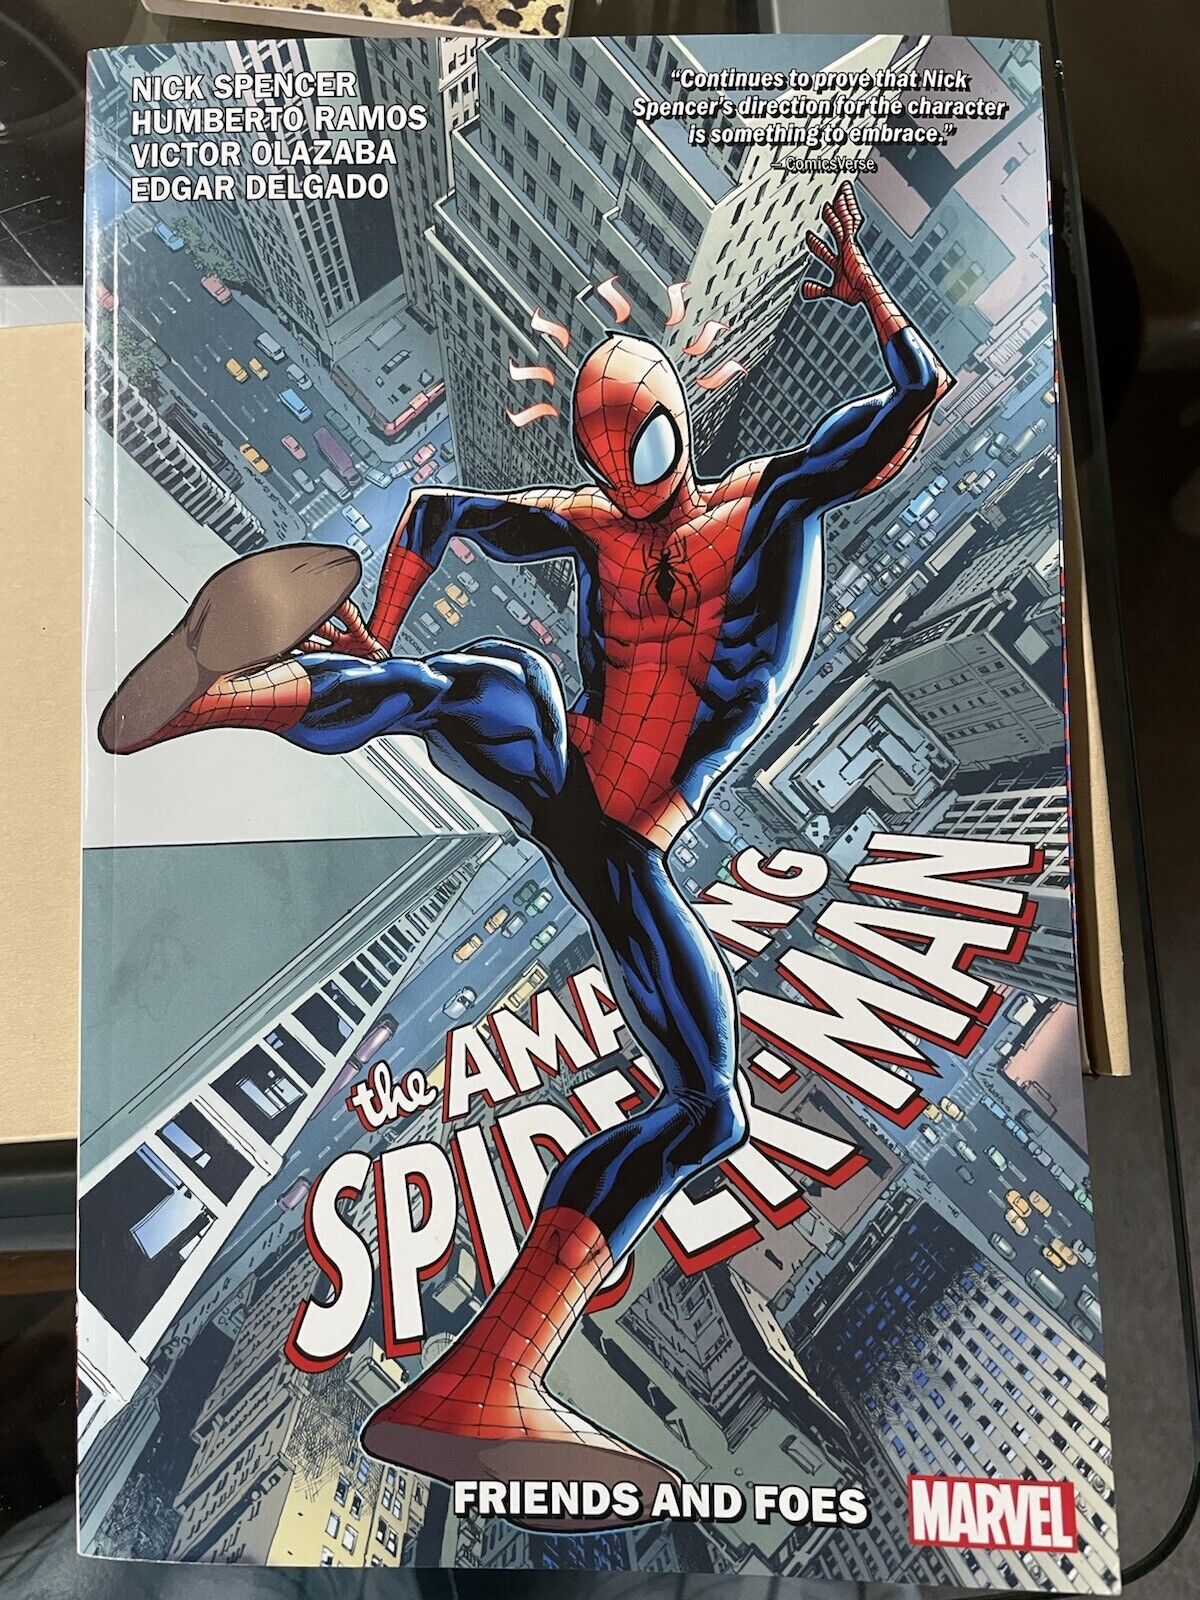 The Amaxing Spider-Man comic book